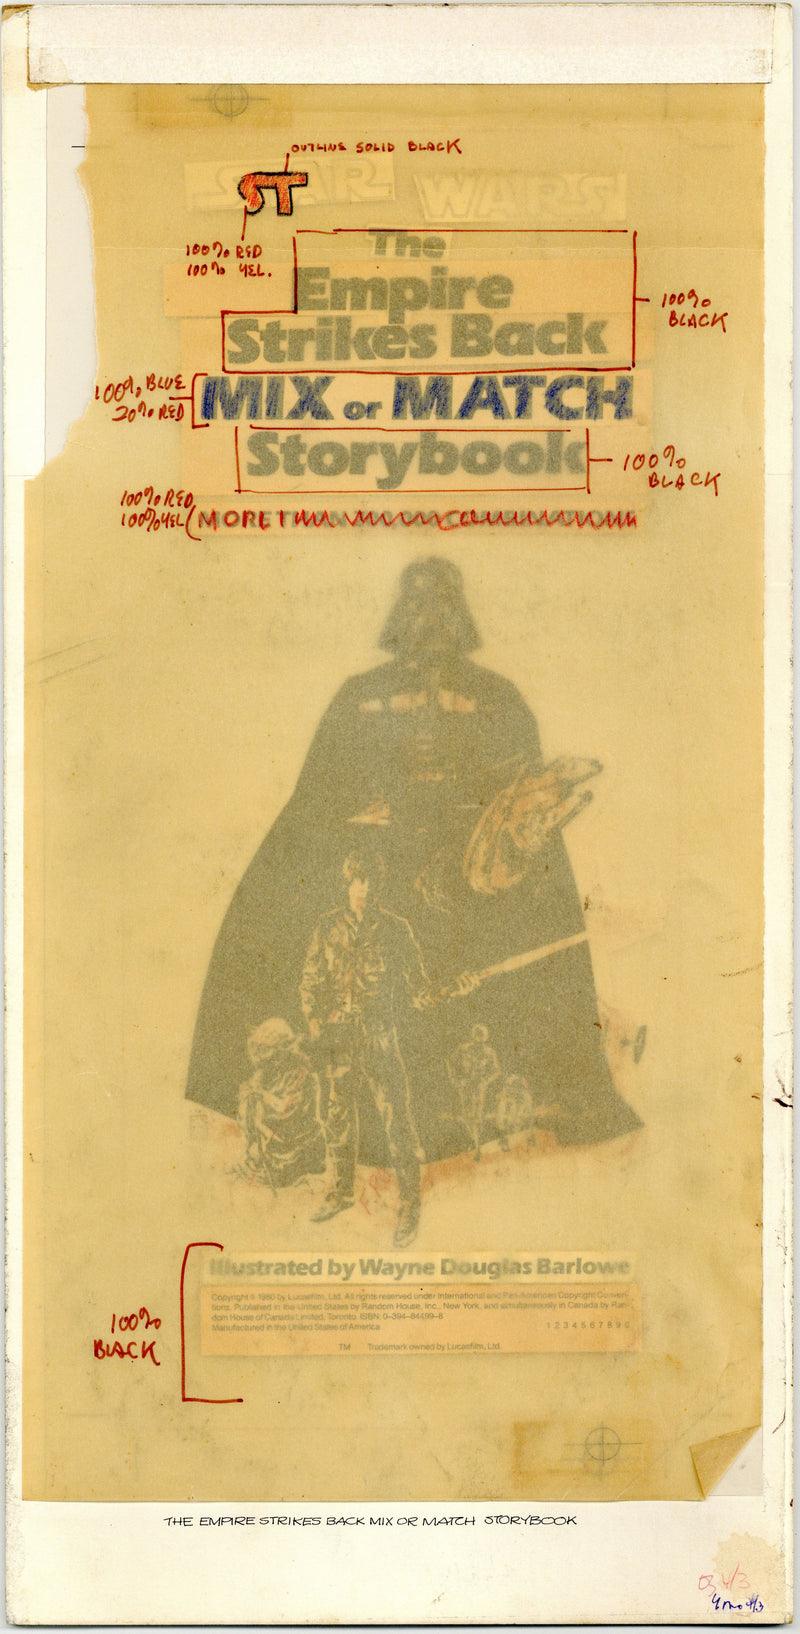 Star Wars: The Empire Strikes Back Mix and Match Storybook Cover Layout Concept